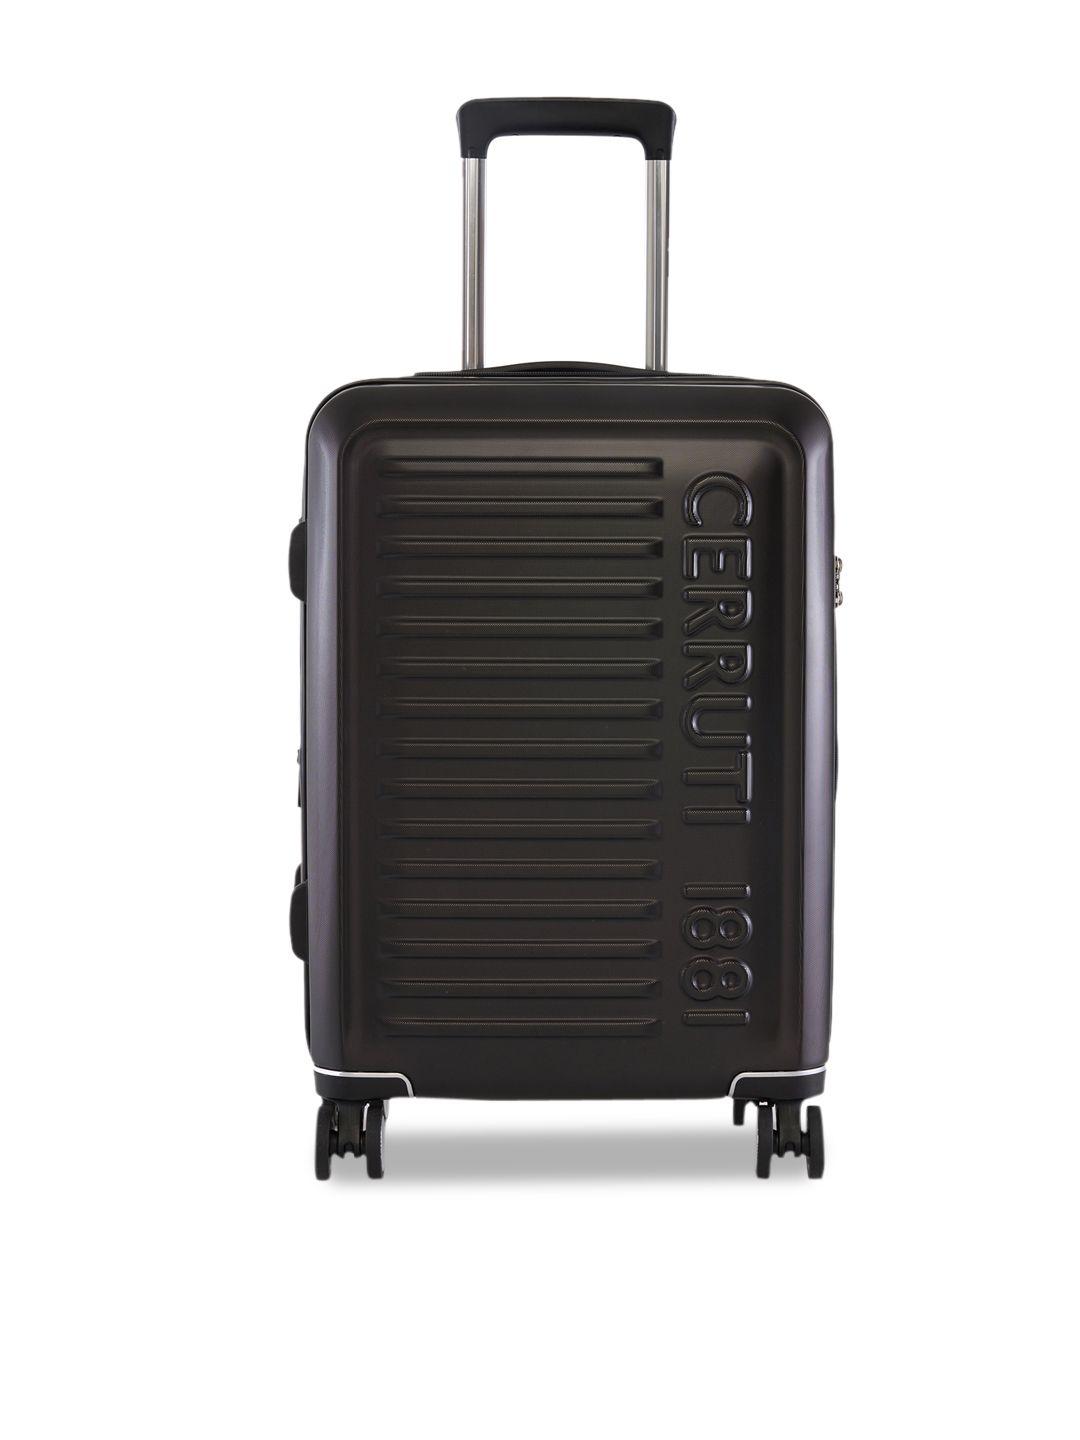 cerruti hard-sided cabin textured trolley suitcase